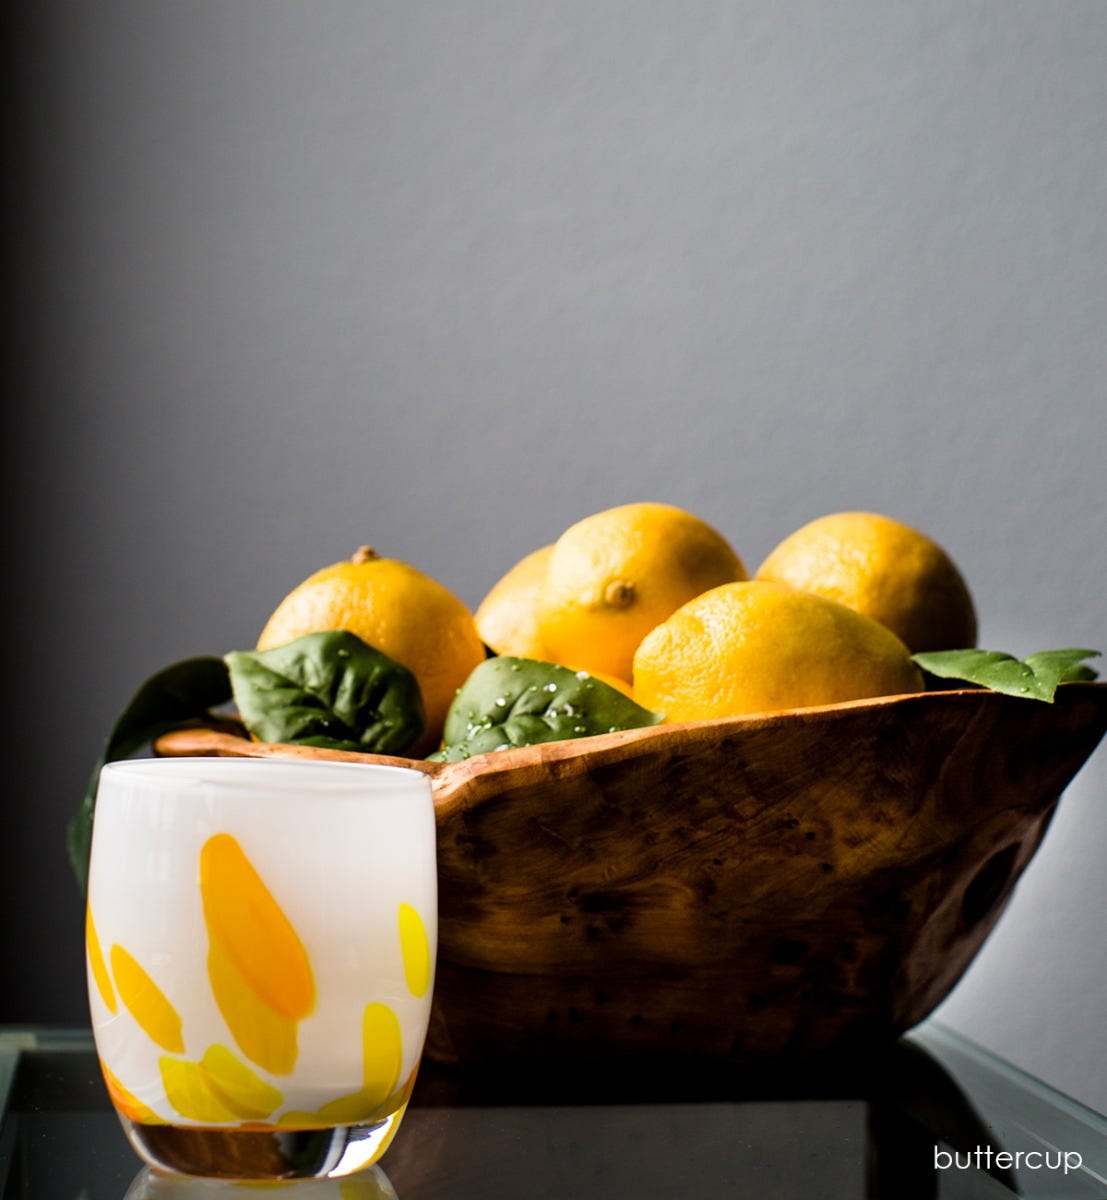 buttercup, yellow petals on white, hand-blown glass votive candle holder on a glass table with a bowl of lemons behind it.